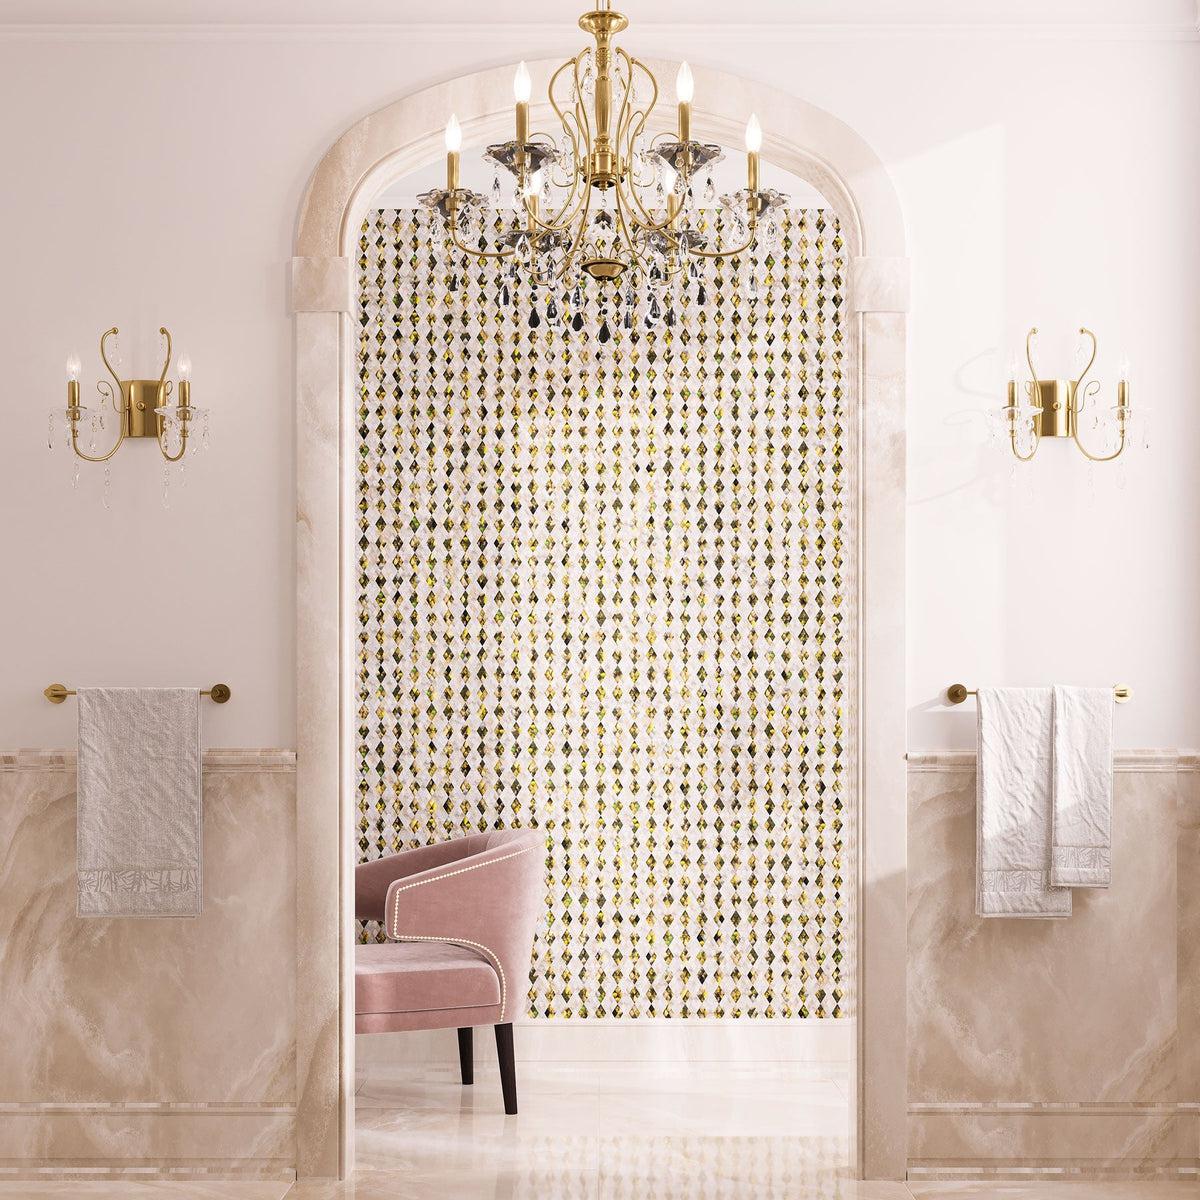 Elegant bathroom with diamond mother of pearl accent wall tile